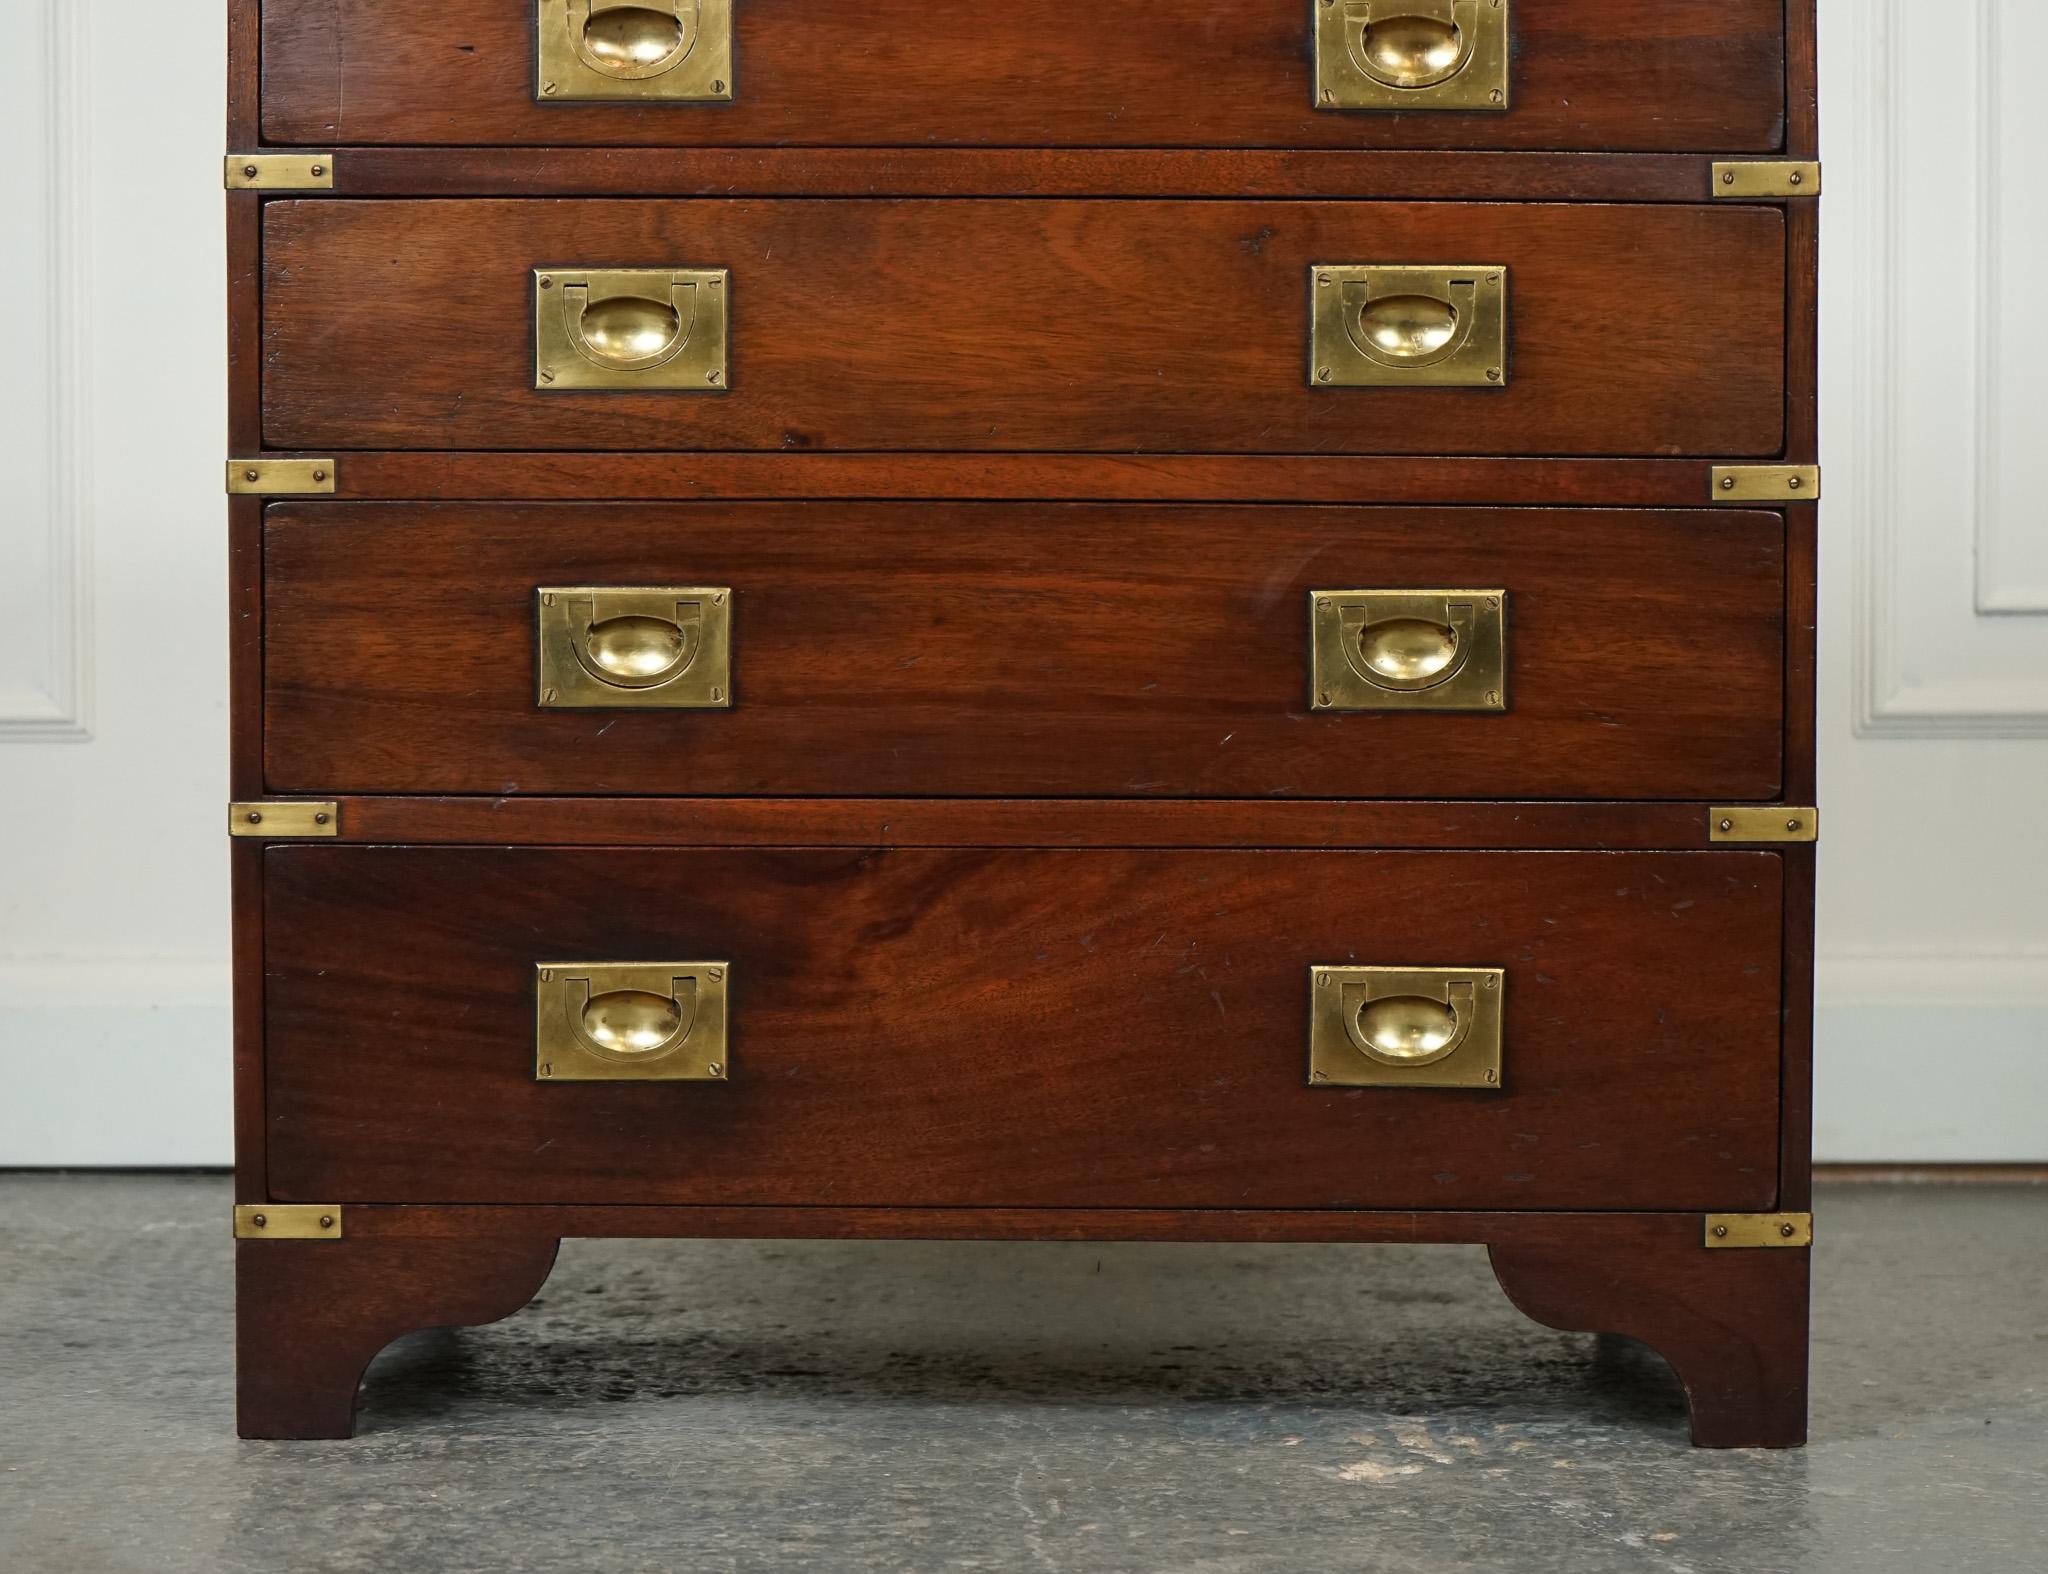 Hand-Crafted STUNNING HARRODS KENNEDY MILITARY CAMPAIGN CHEST OF DRAWERS WiTH BRASS HANDLES